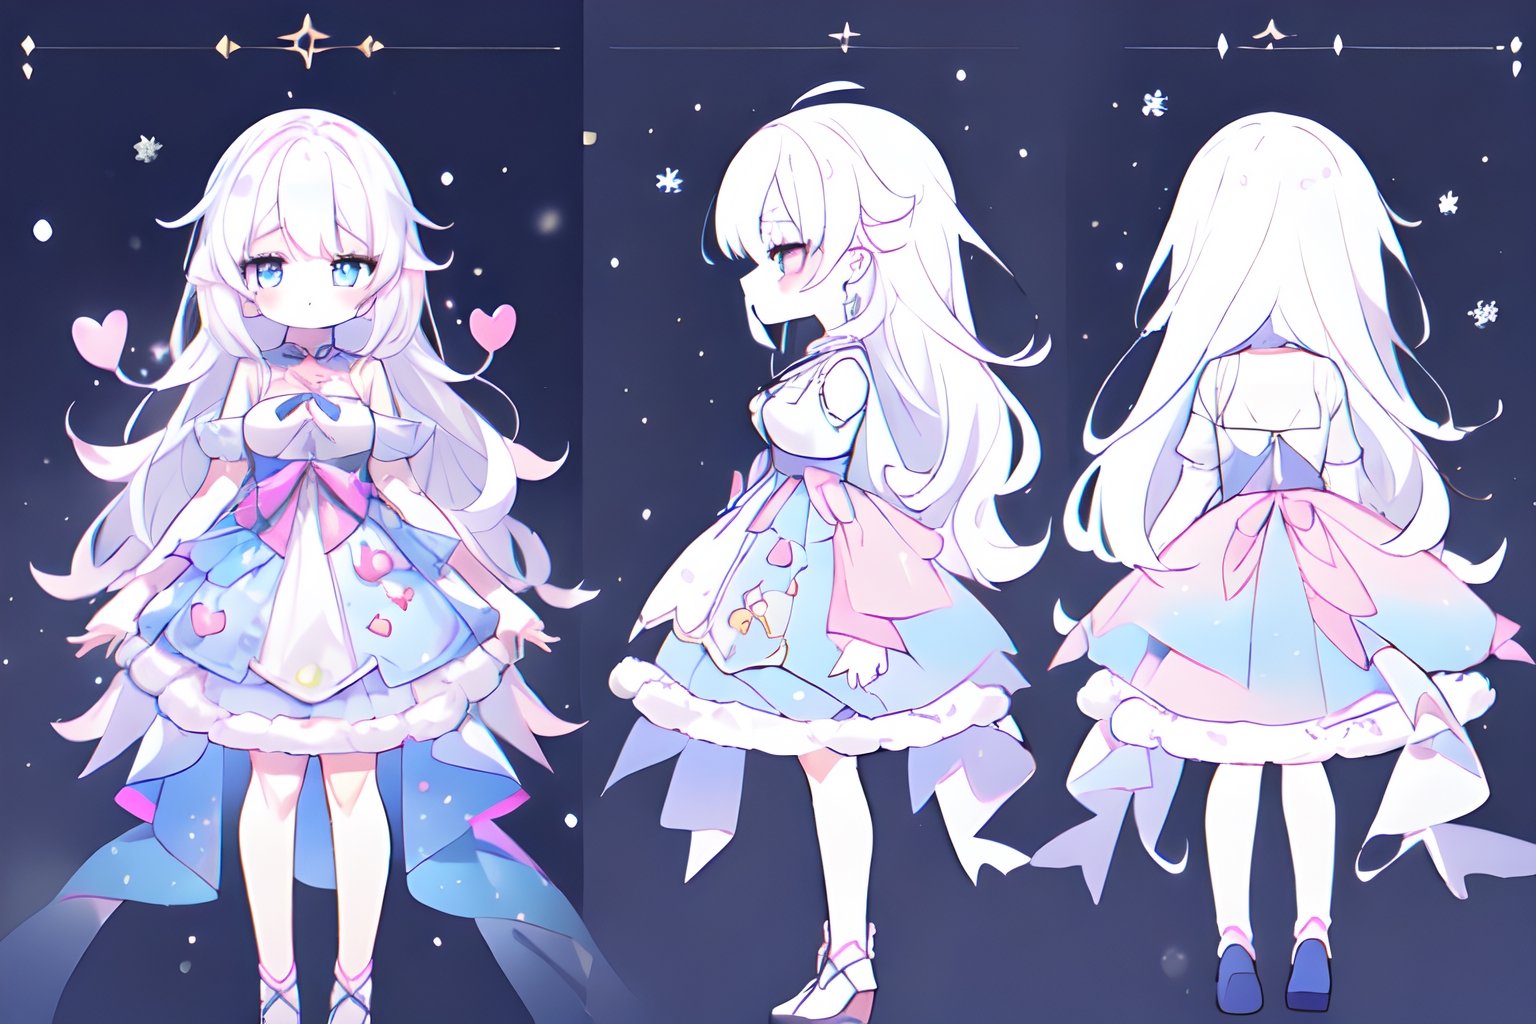 ((magical girl,  white hair,  rainbow eyes,  doll dress,  short dress,  long hair,  small breasts,  pale skin,  soft skin,  colorful snow background,  rainbow,  hearts,  snow,  snowing,  ice,  pastel,  sun)),  (masterpiece,  best quality:1.2),  fluffy,  soft,  light,  bright,  sparkles,  twinkle,  slightly downcast eyes,  cute,  pink,  purple,  crystals,,,,kawaiitech, ((((character sheet)))),loli, (((short legs))), (((((high details)))))